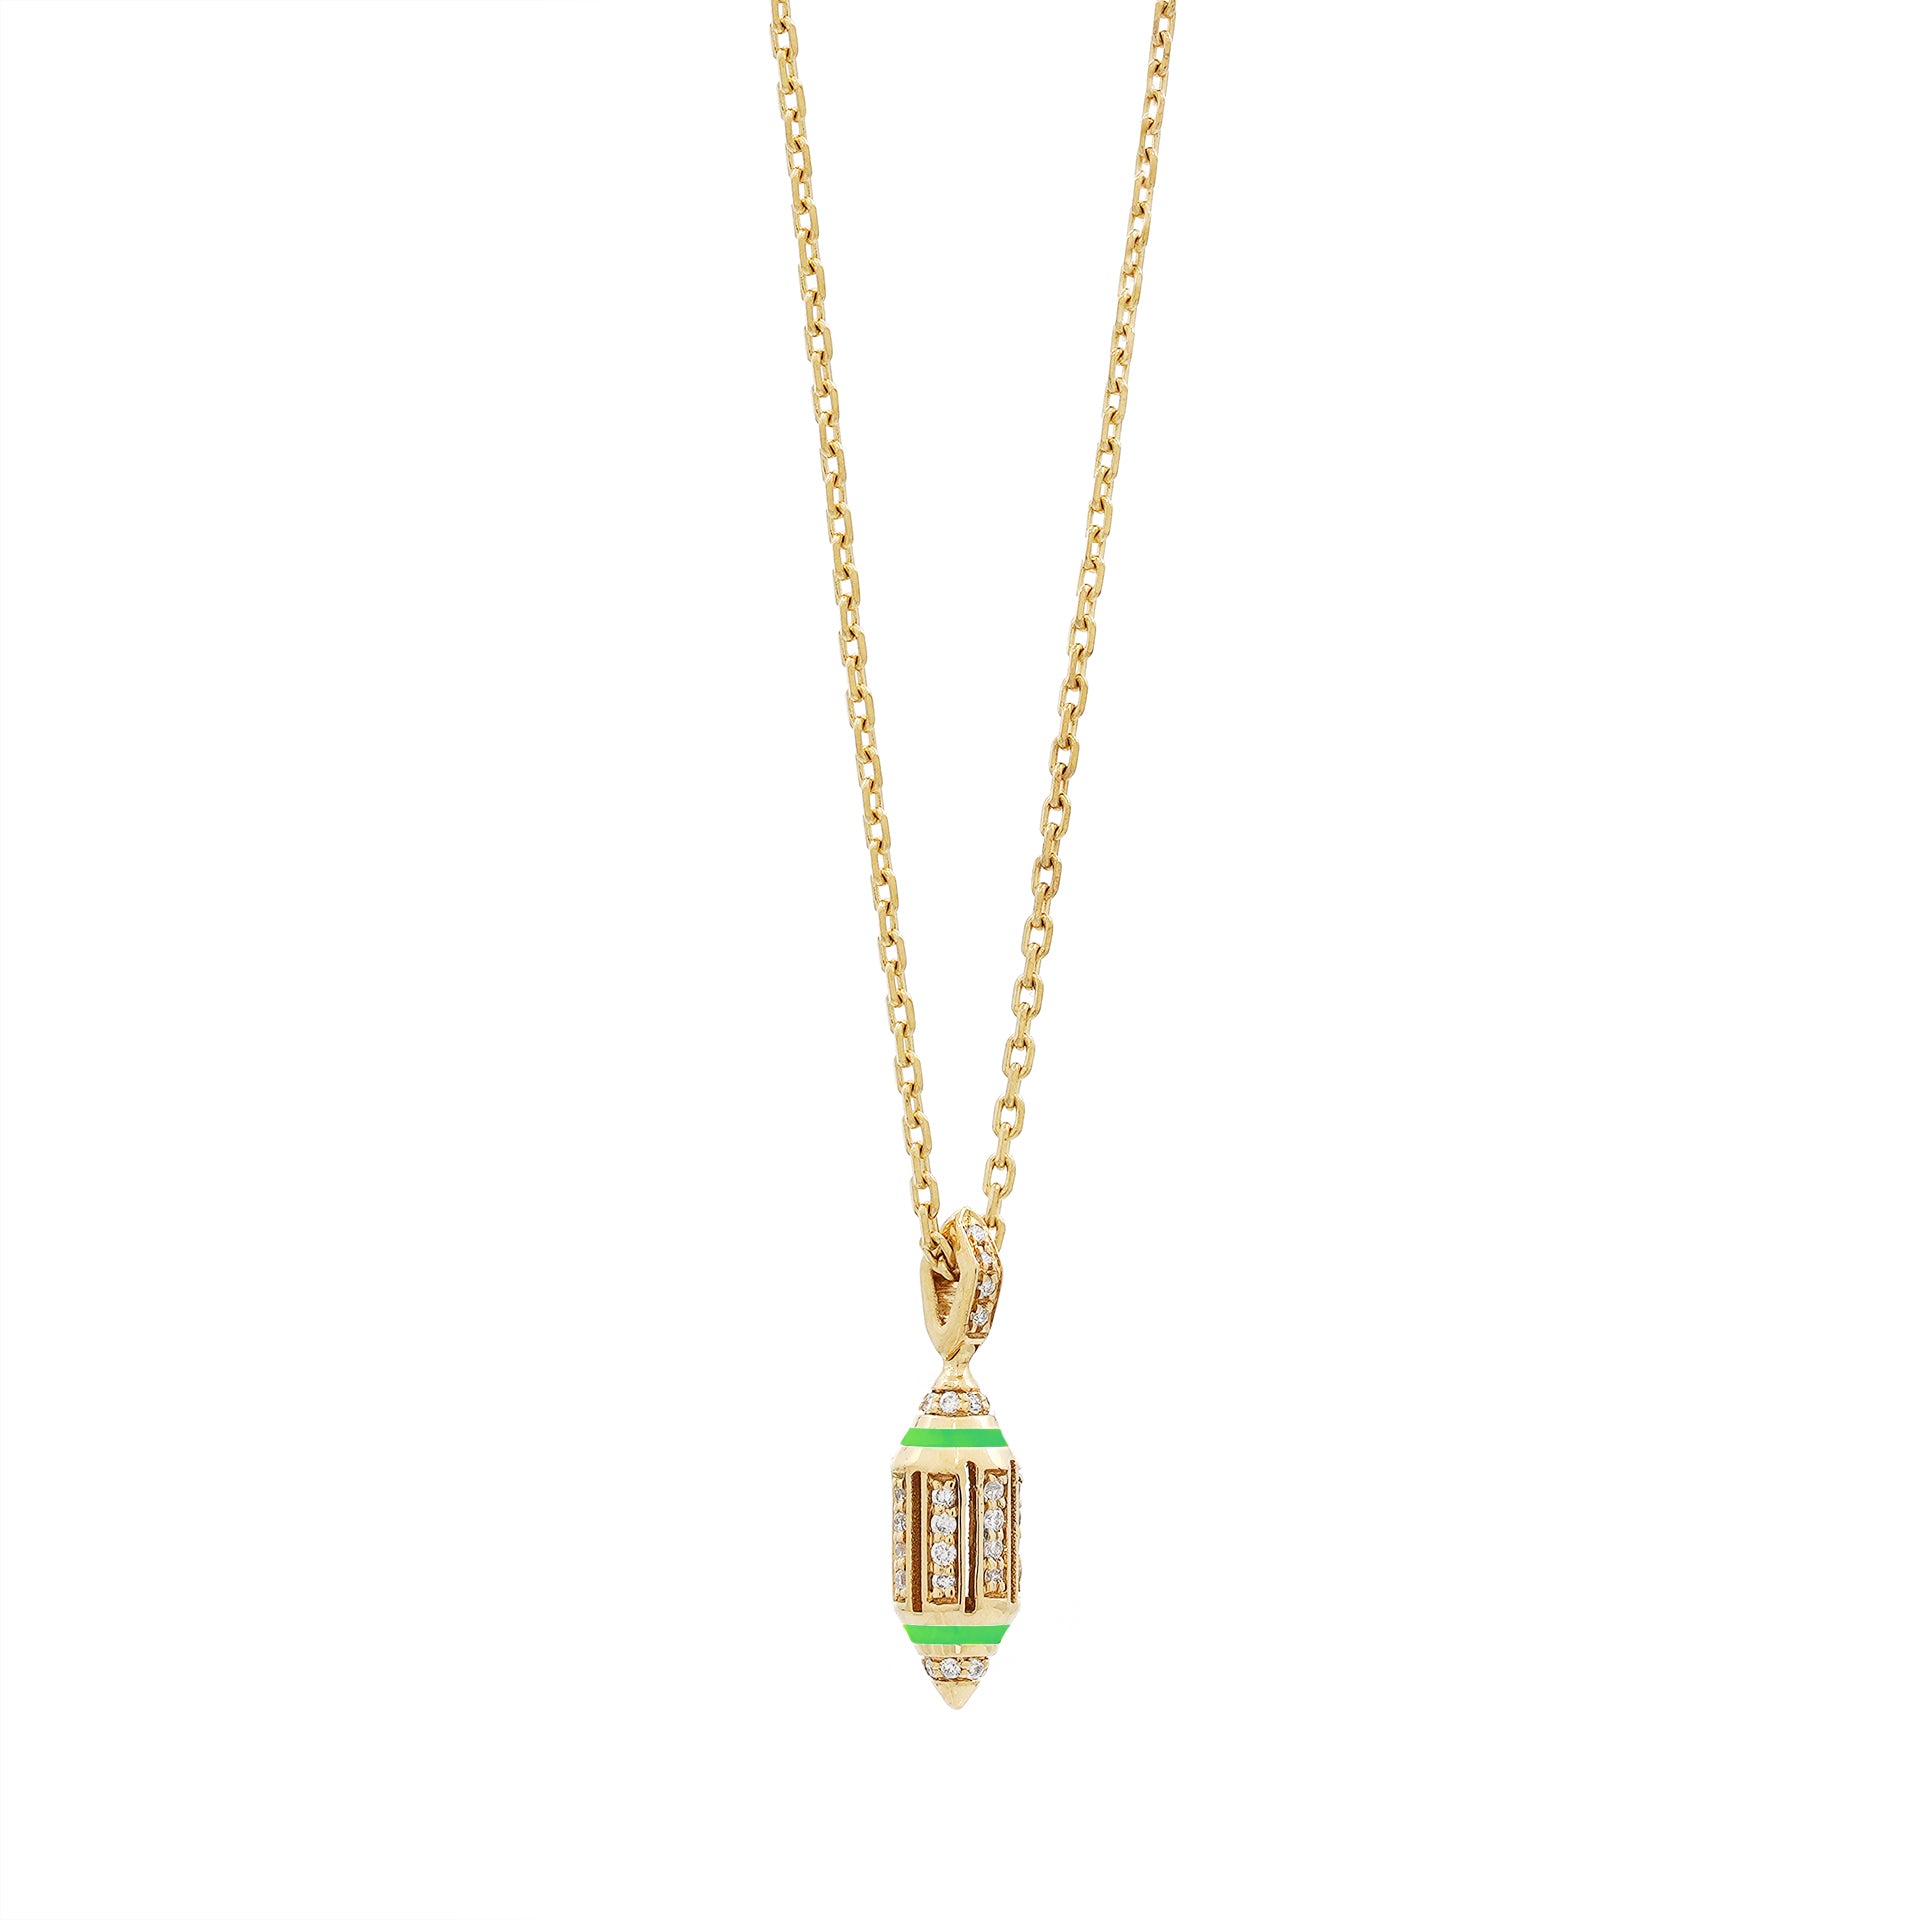 Summer Hues Necklace in Neon Green